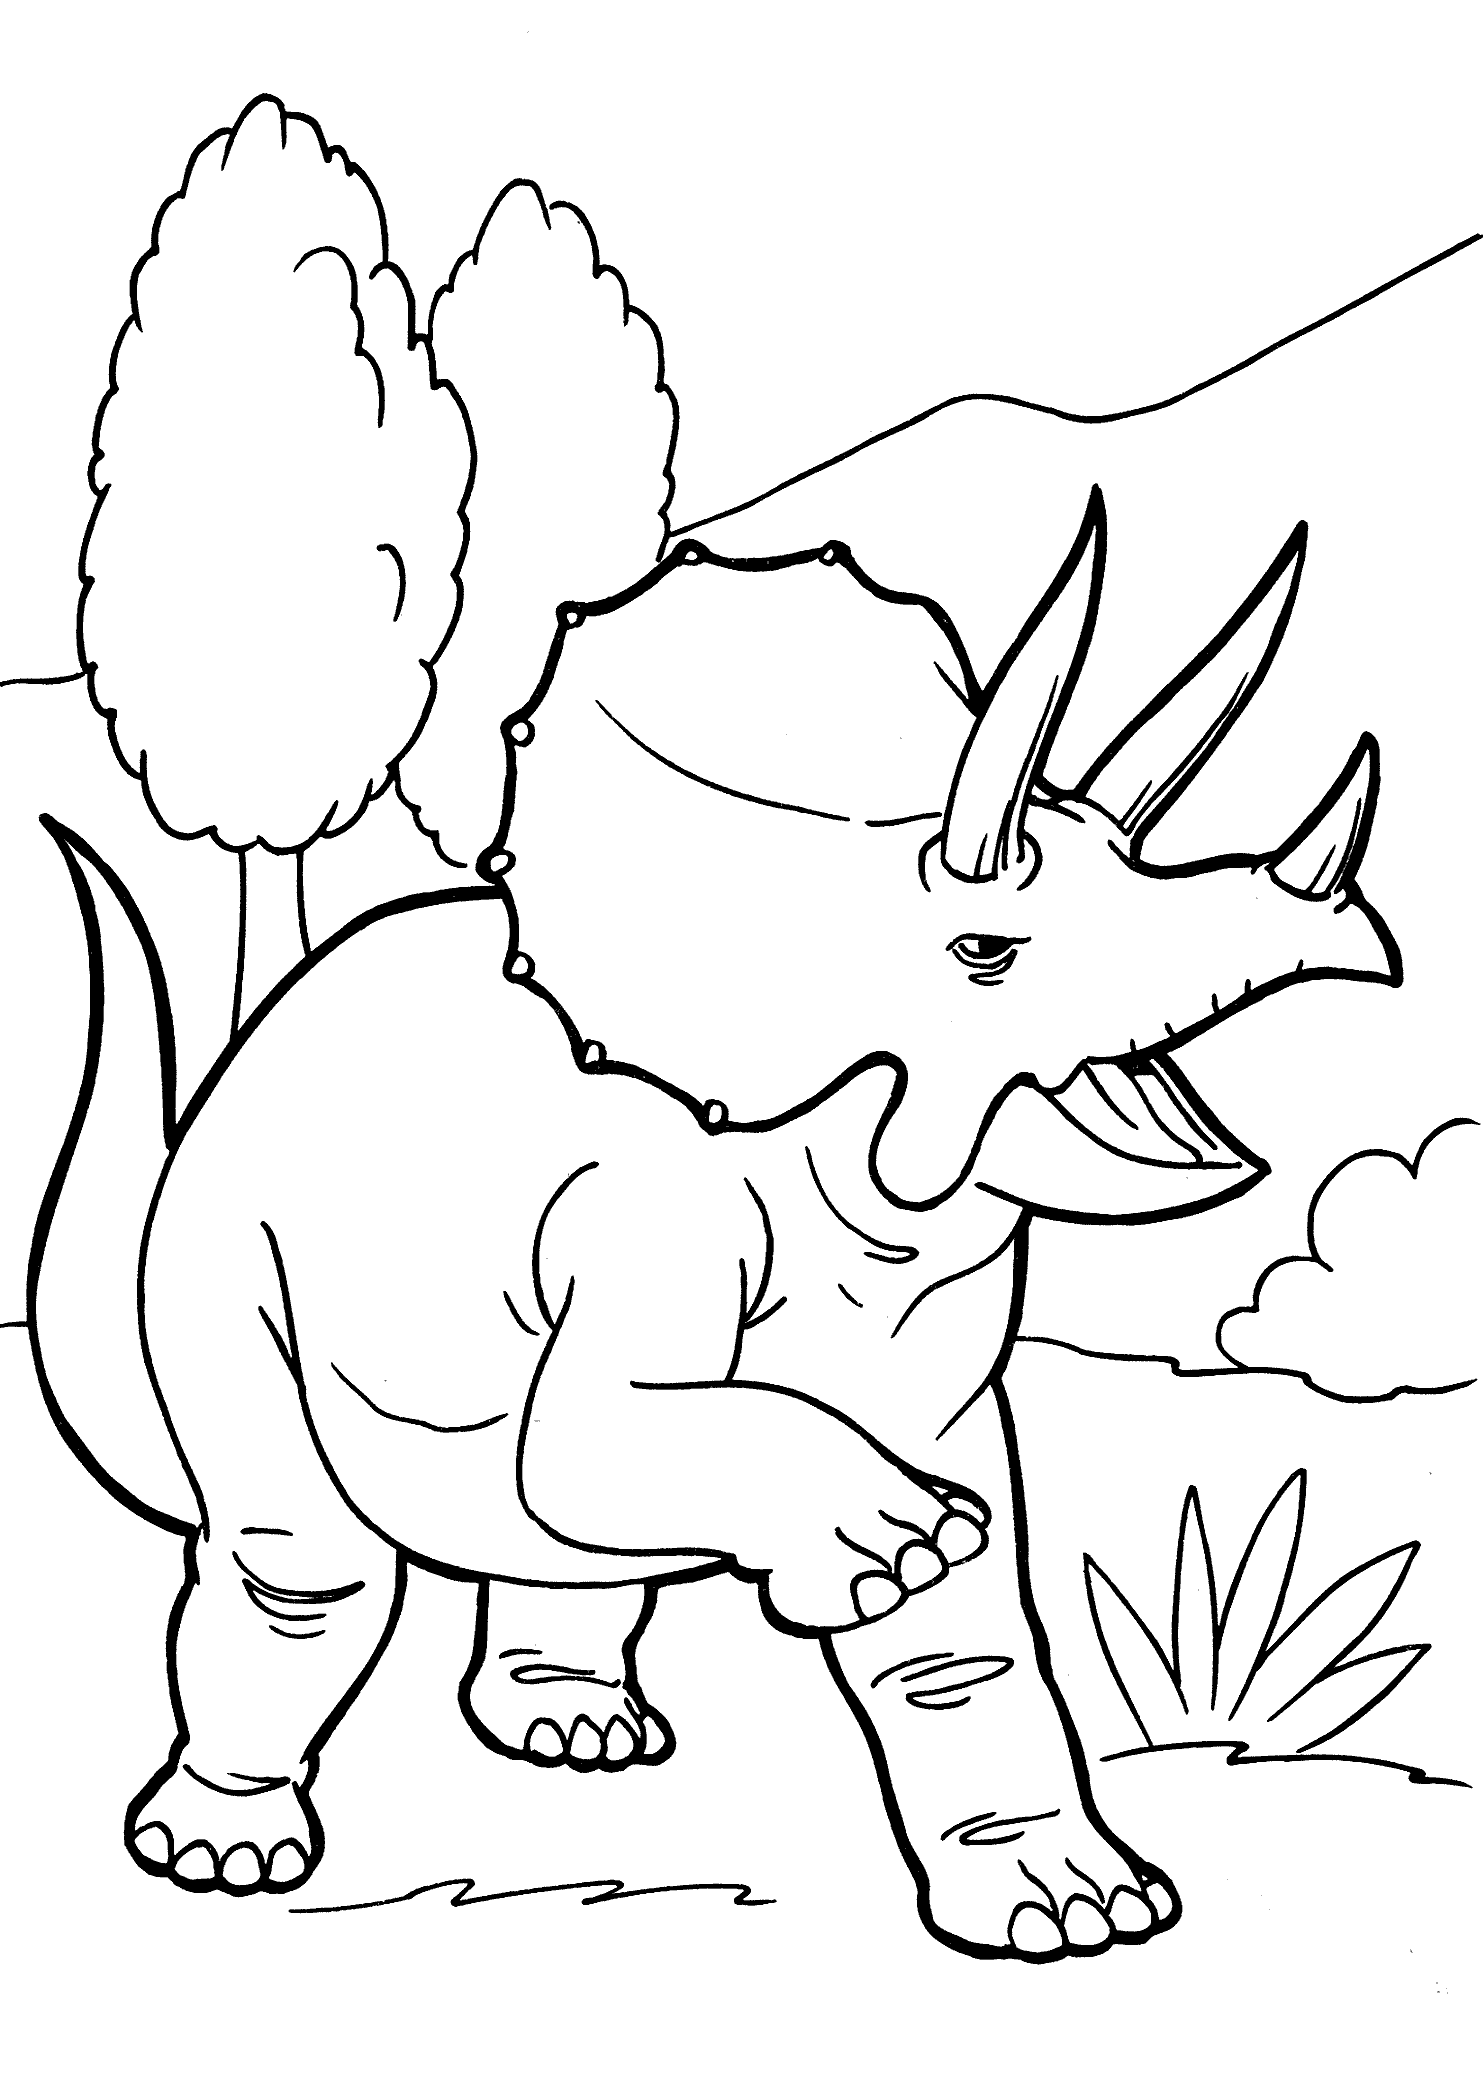 dinosaurs to print dinosaur coloring pages free printable pictures coloring dinosaurs print to 